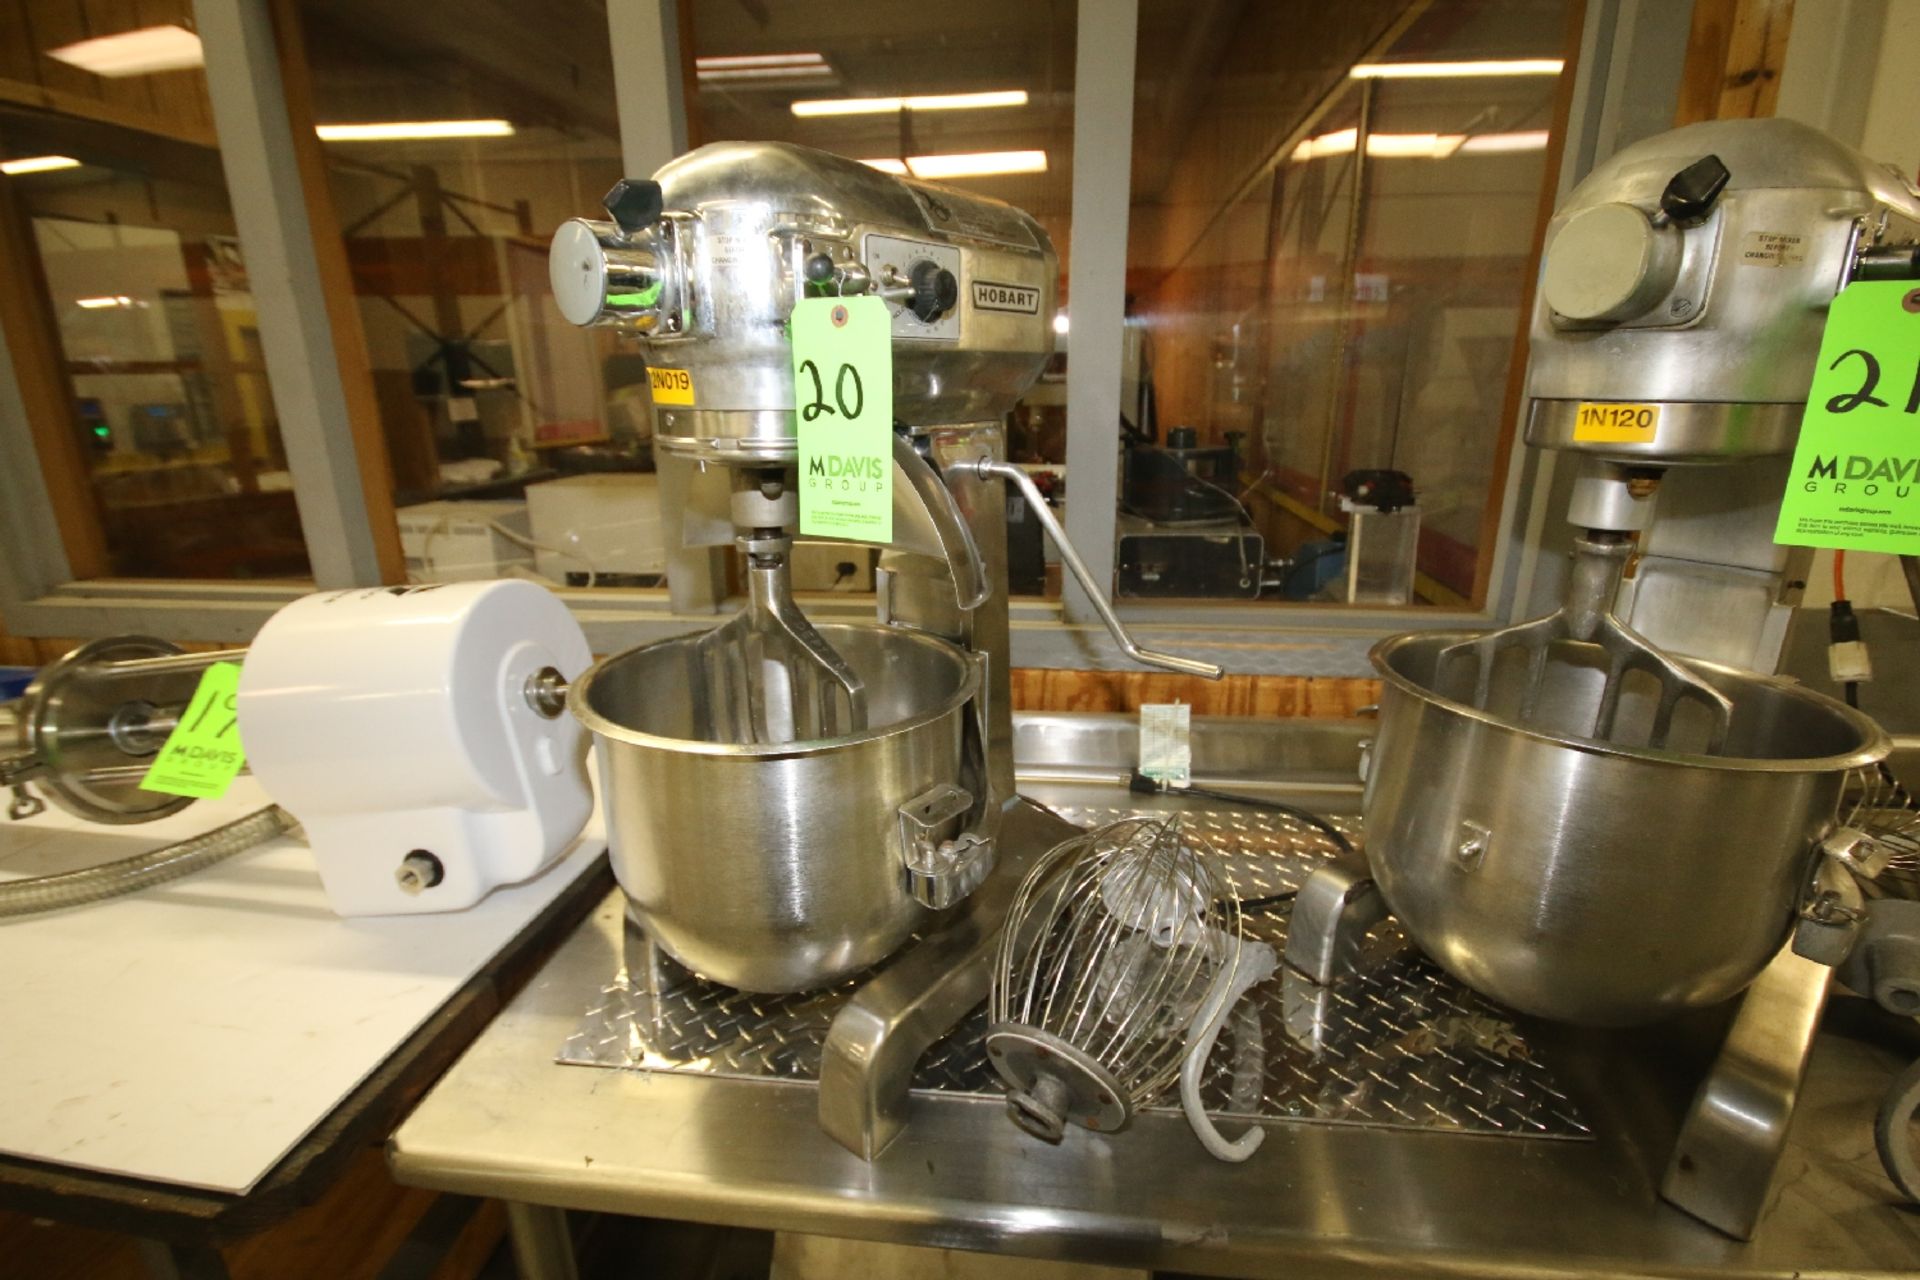 Hobart S/S Table Top Mixer, Model A-200DT, S/N 1-1195-005 with 12" W x 11" Deep S/S Mixing Bowl,